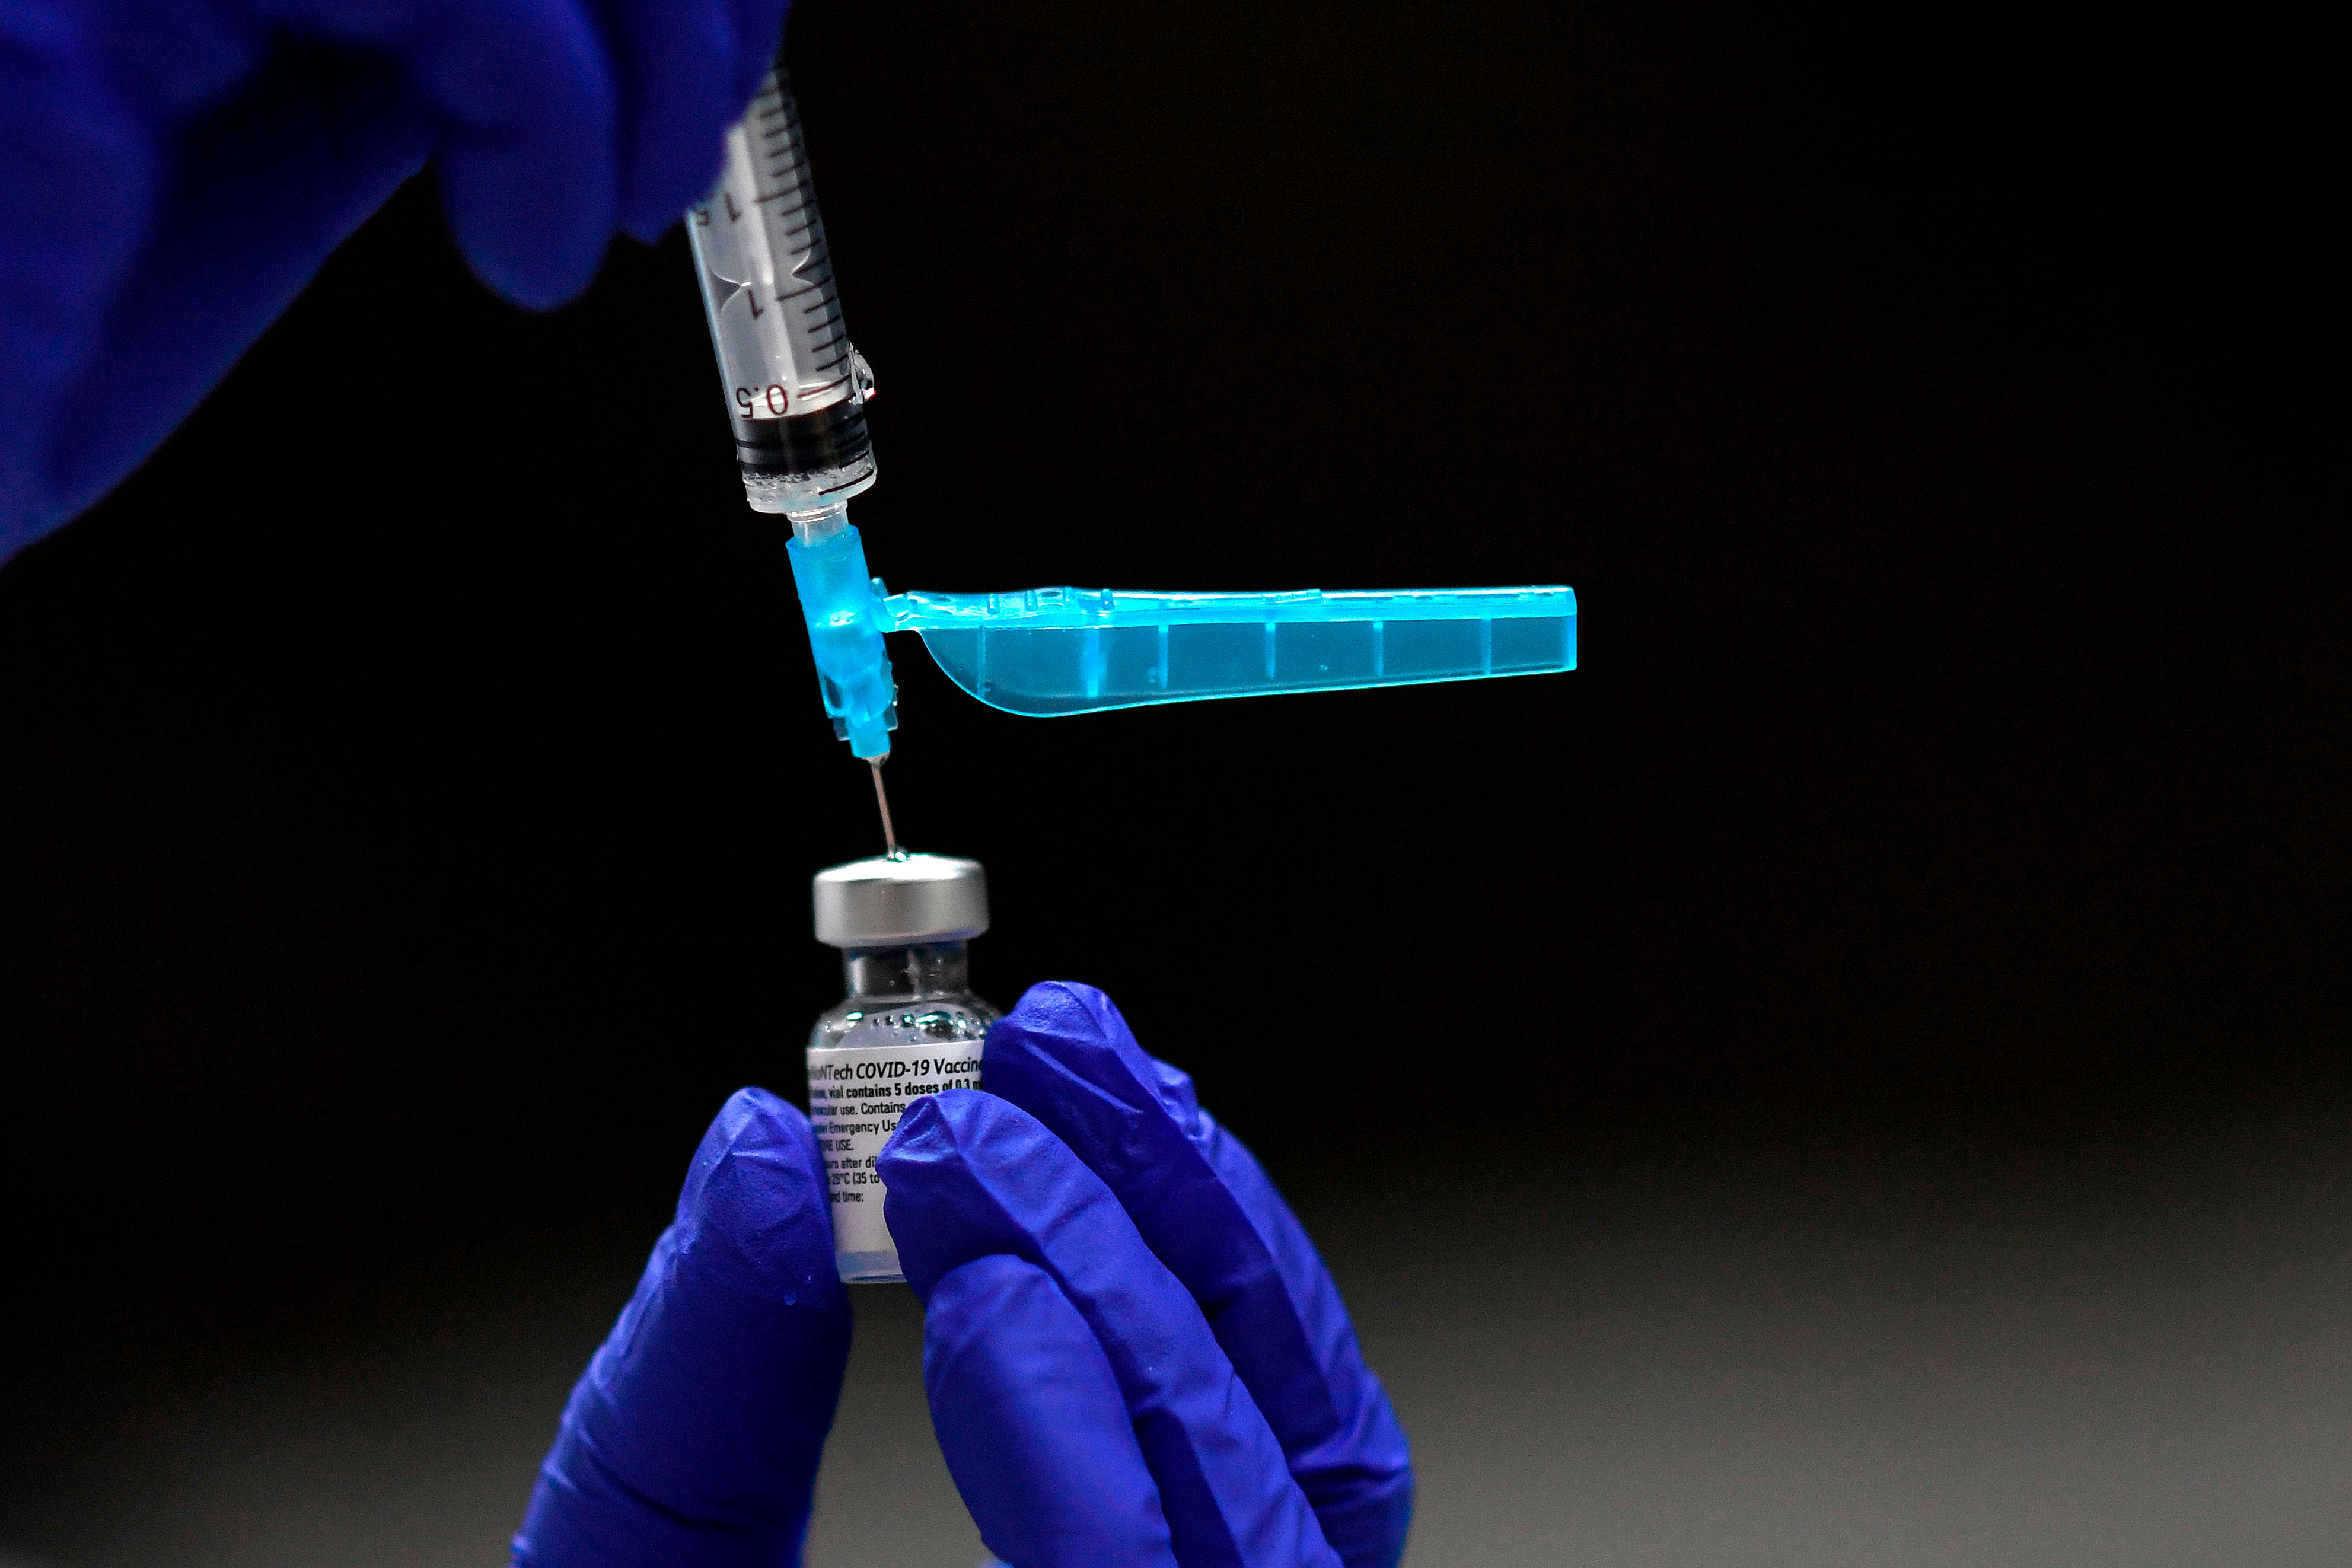 A health worker prepares the Pfizer/BioNTech Covid-19 vaccine in Madrid on January 12.